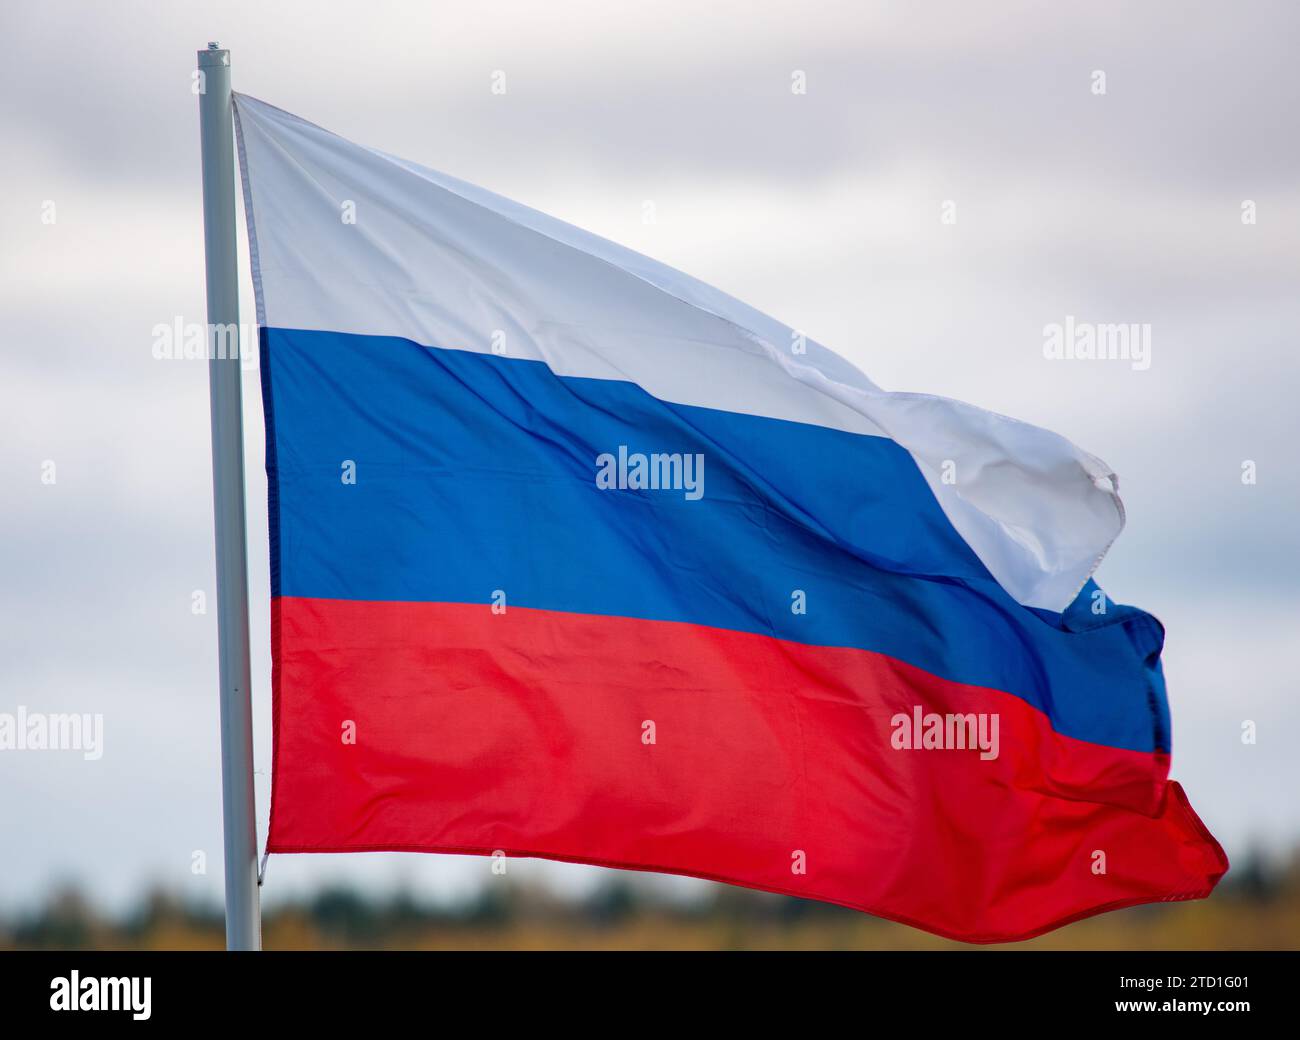 The white-blue-red flag of the Russian Federation is flying in the wind against a cloudy sky. Stock Photo